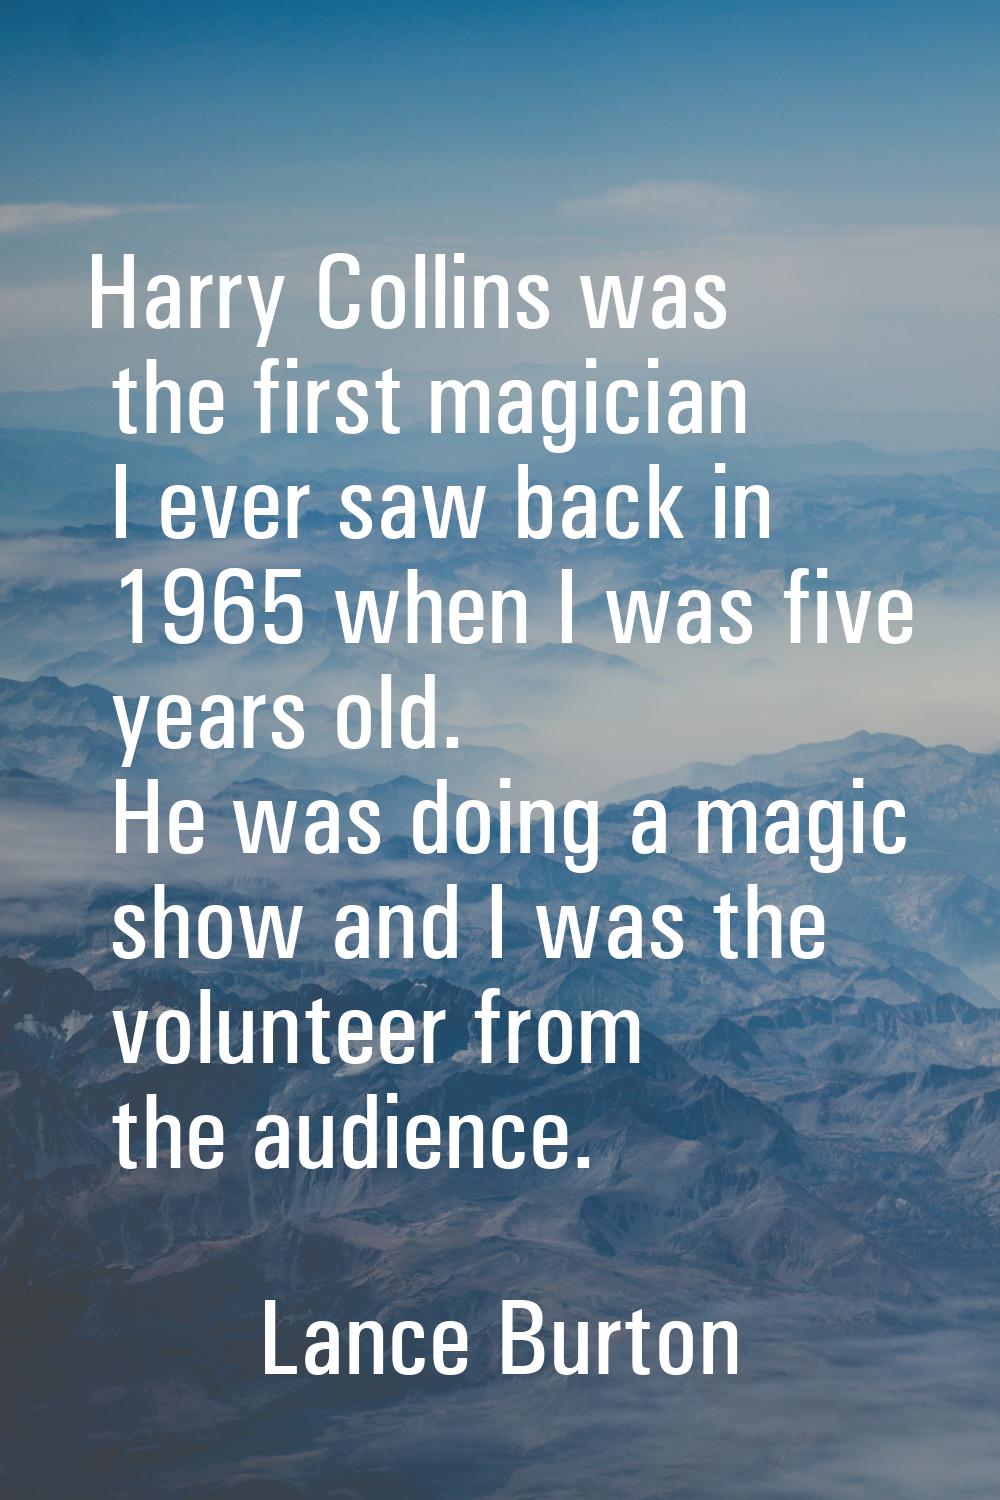 Harry Collins was the first magician I ever saw back in 1965 when I was five years old. He was doin